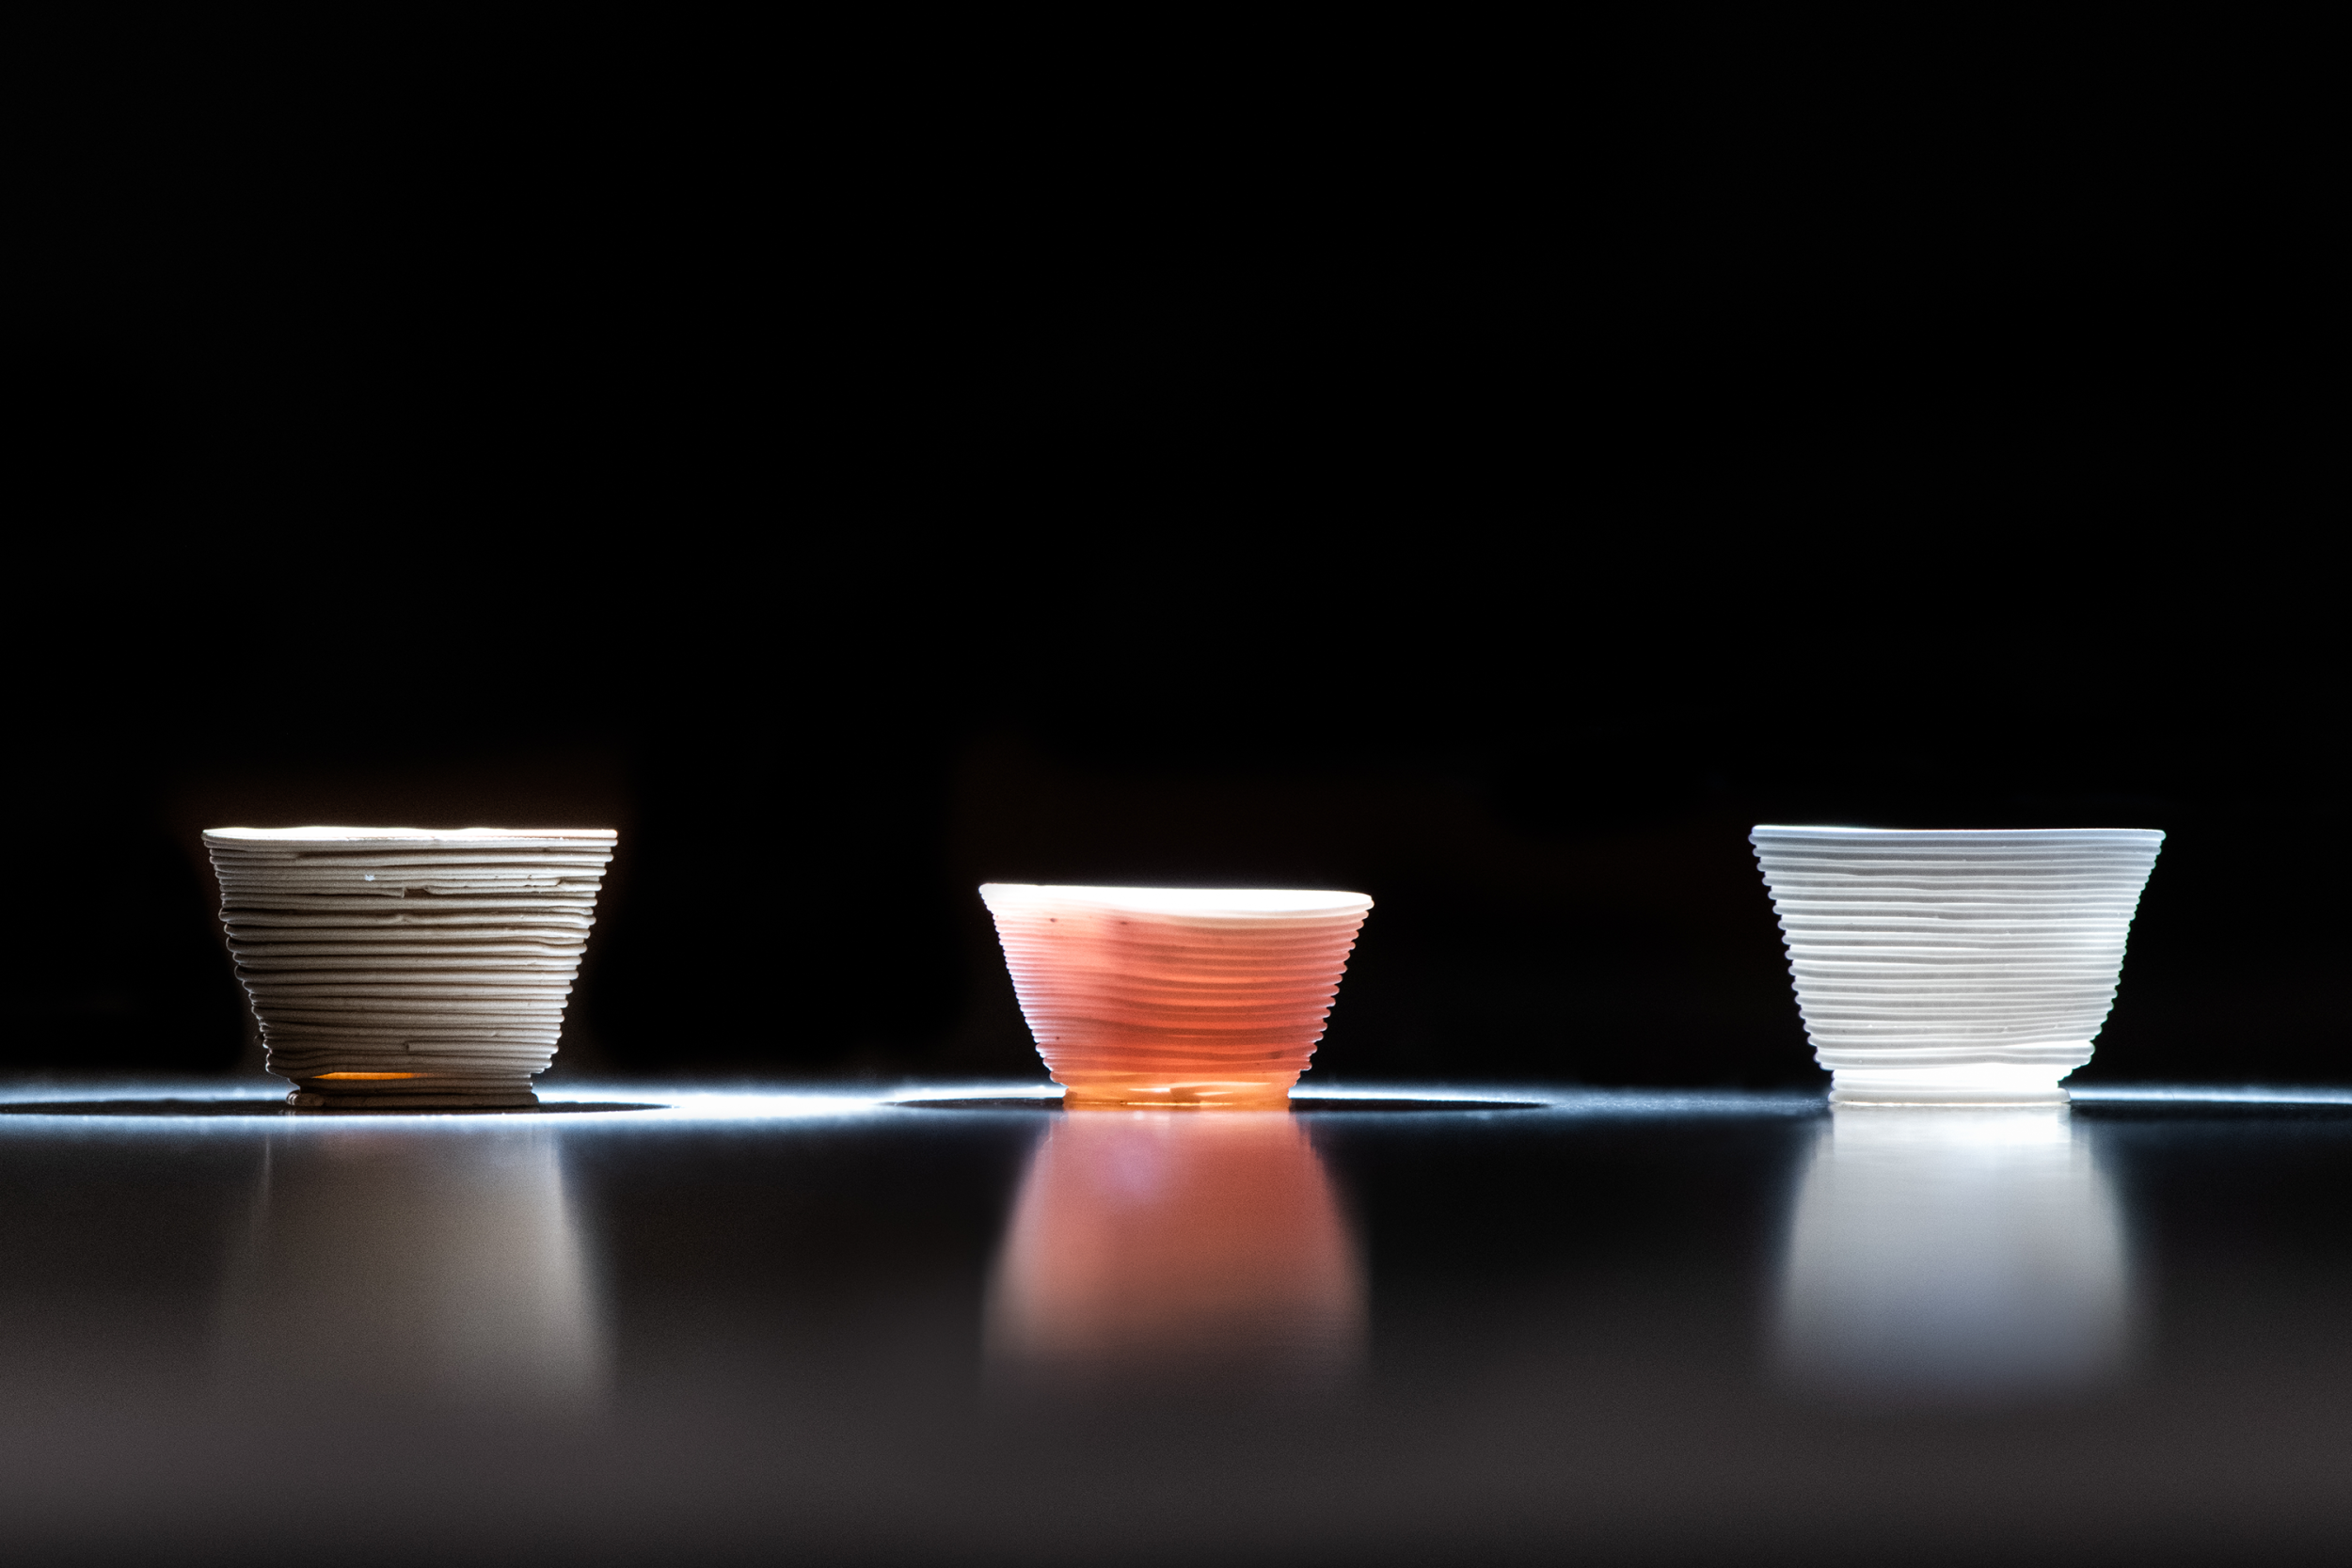 Researchers used the low-temperature additive manufacturing process to build the glass cups above.   The optical behavior of the printed cups can be tailored by altering the chemical components of the inks. 